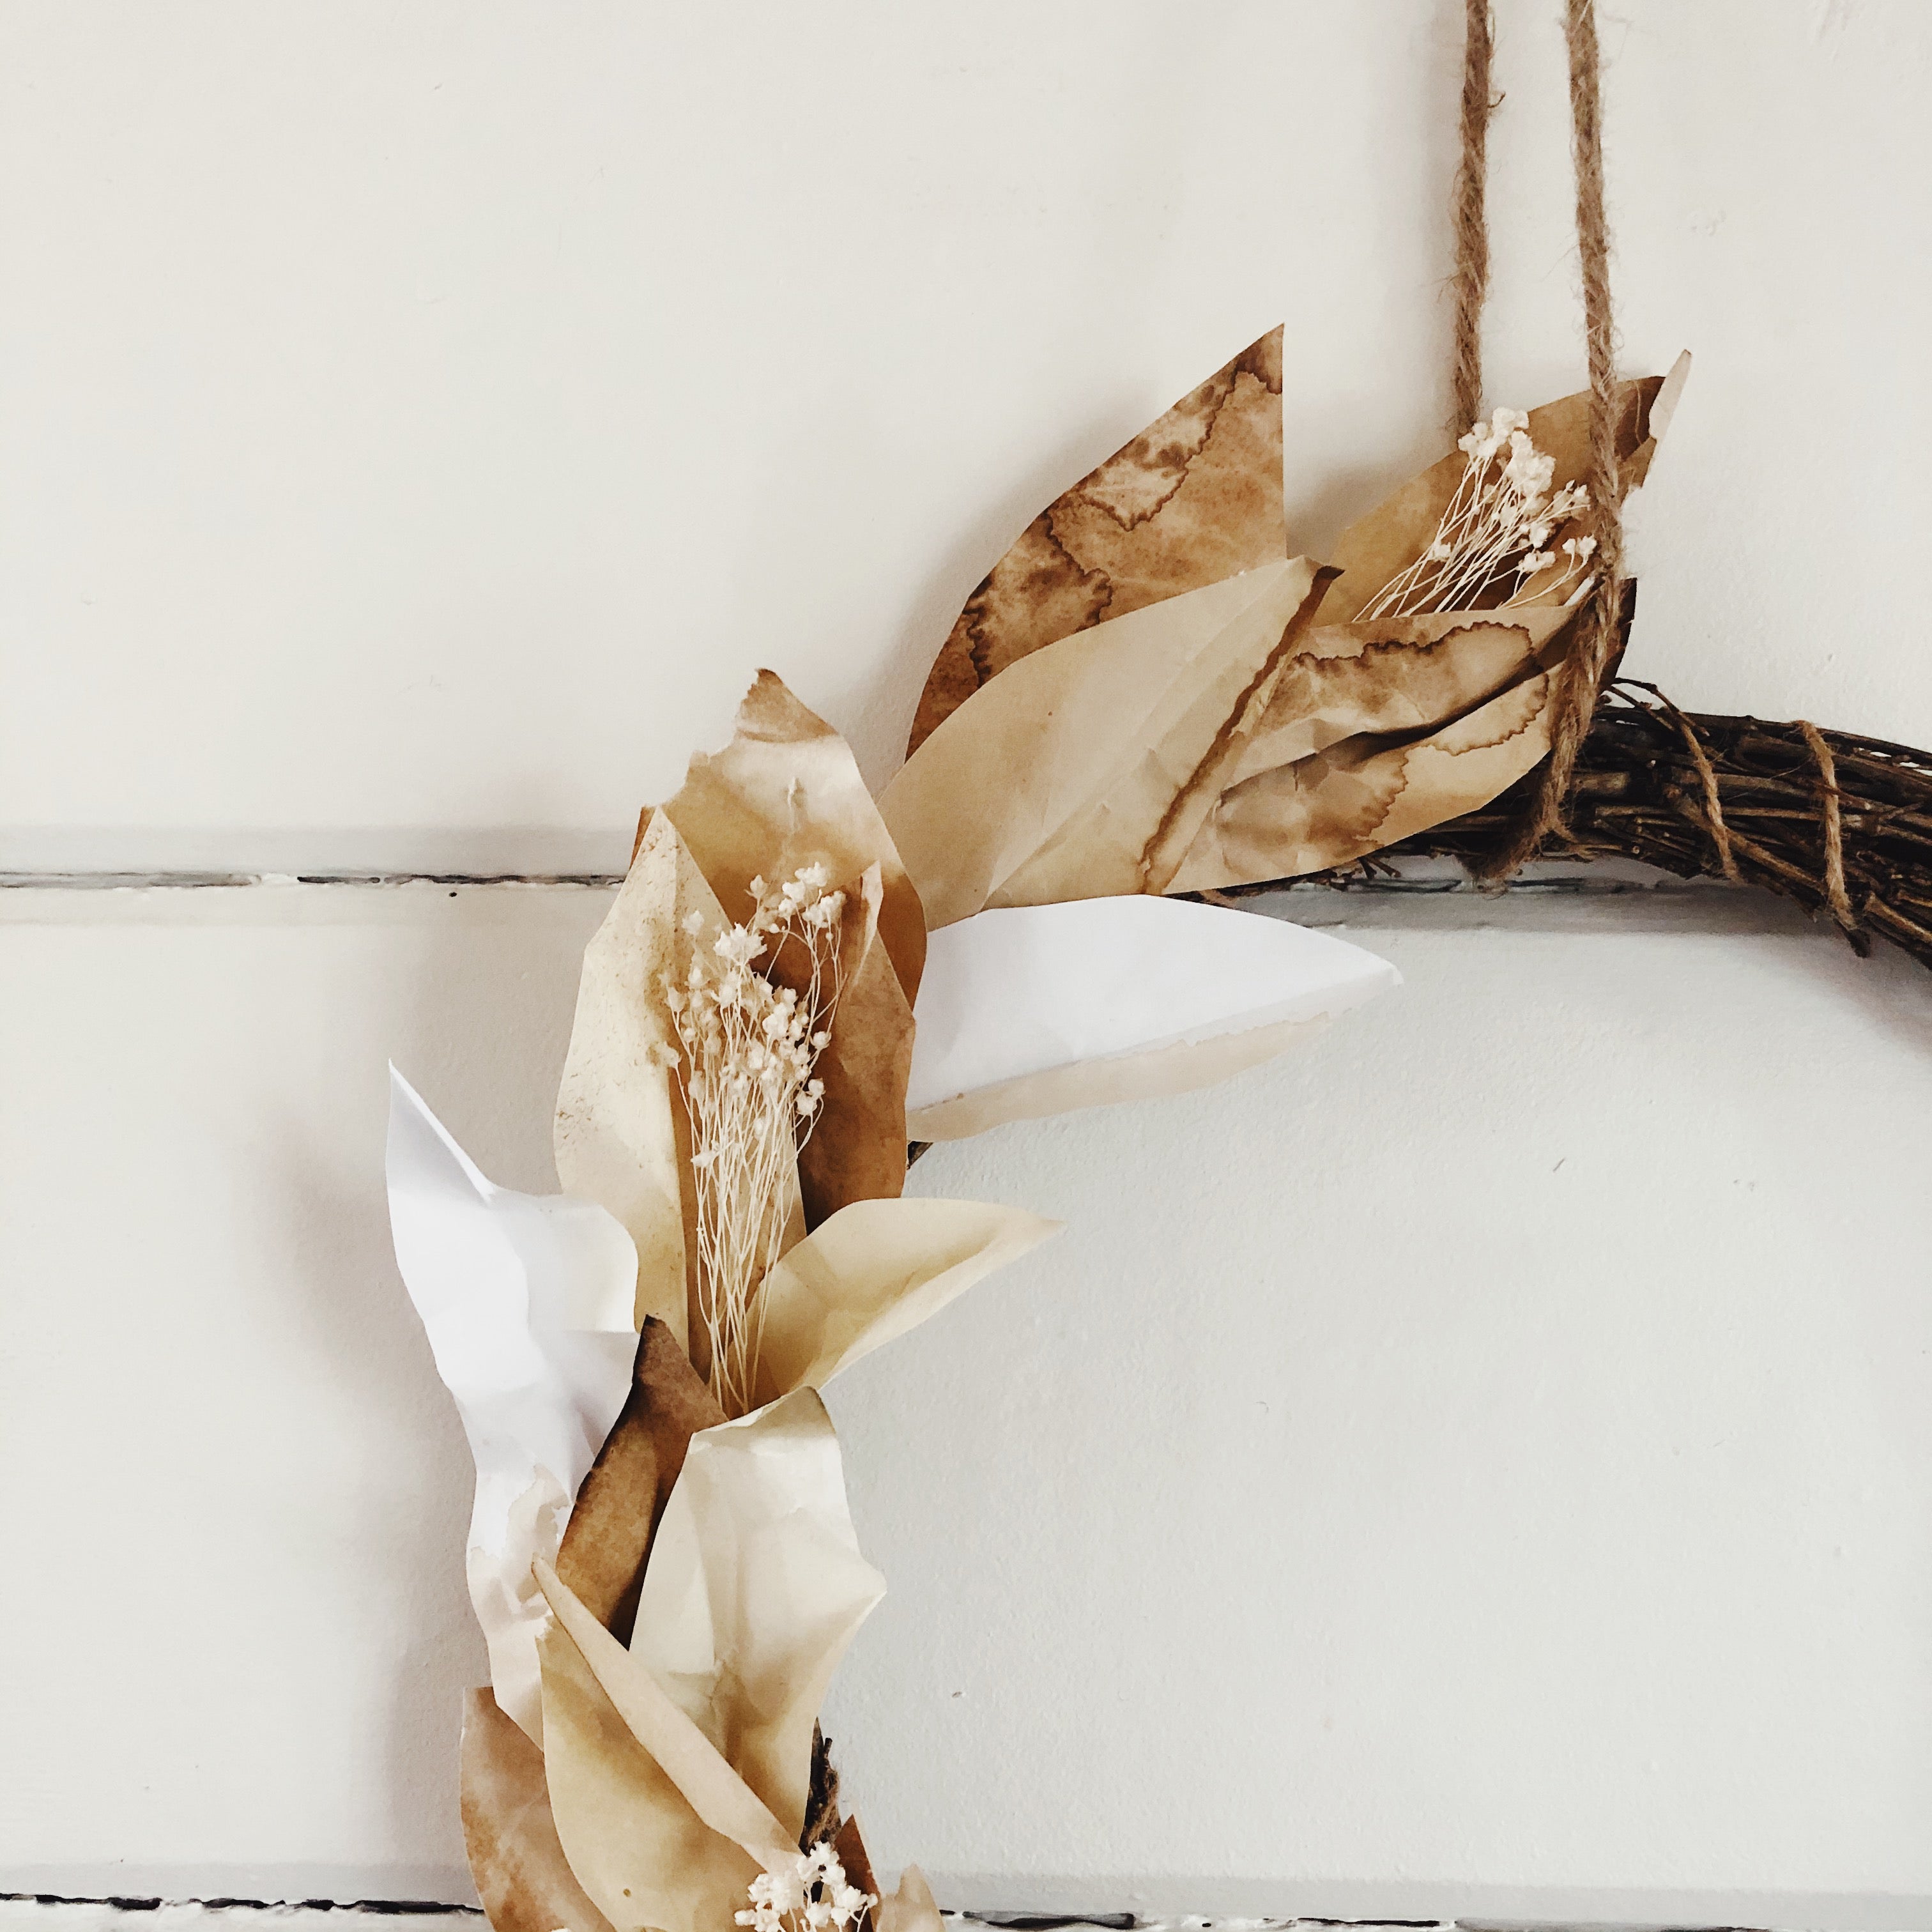 DIY Paper dried leaves for fall crafts (how to make paper